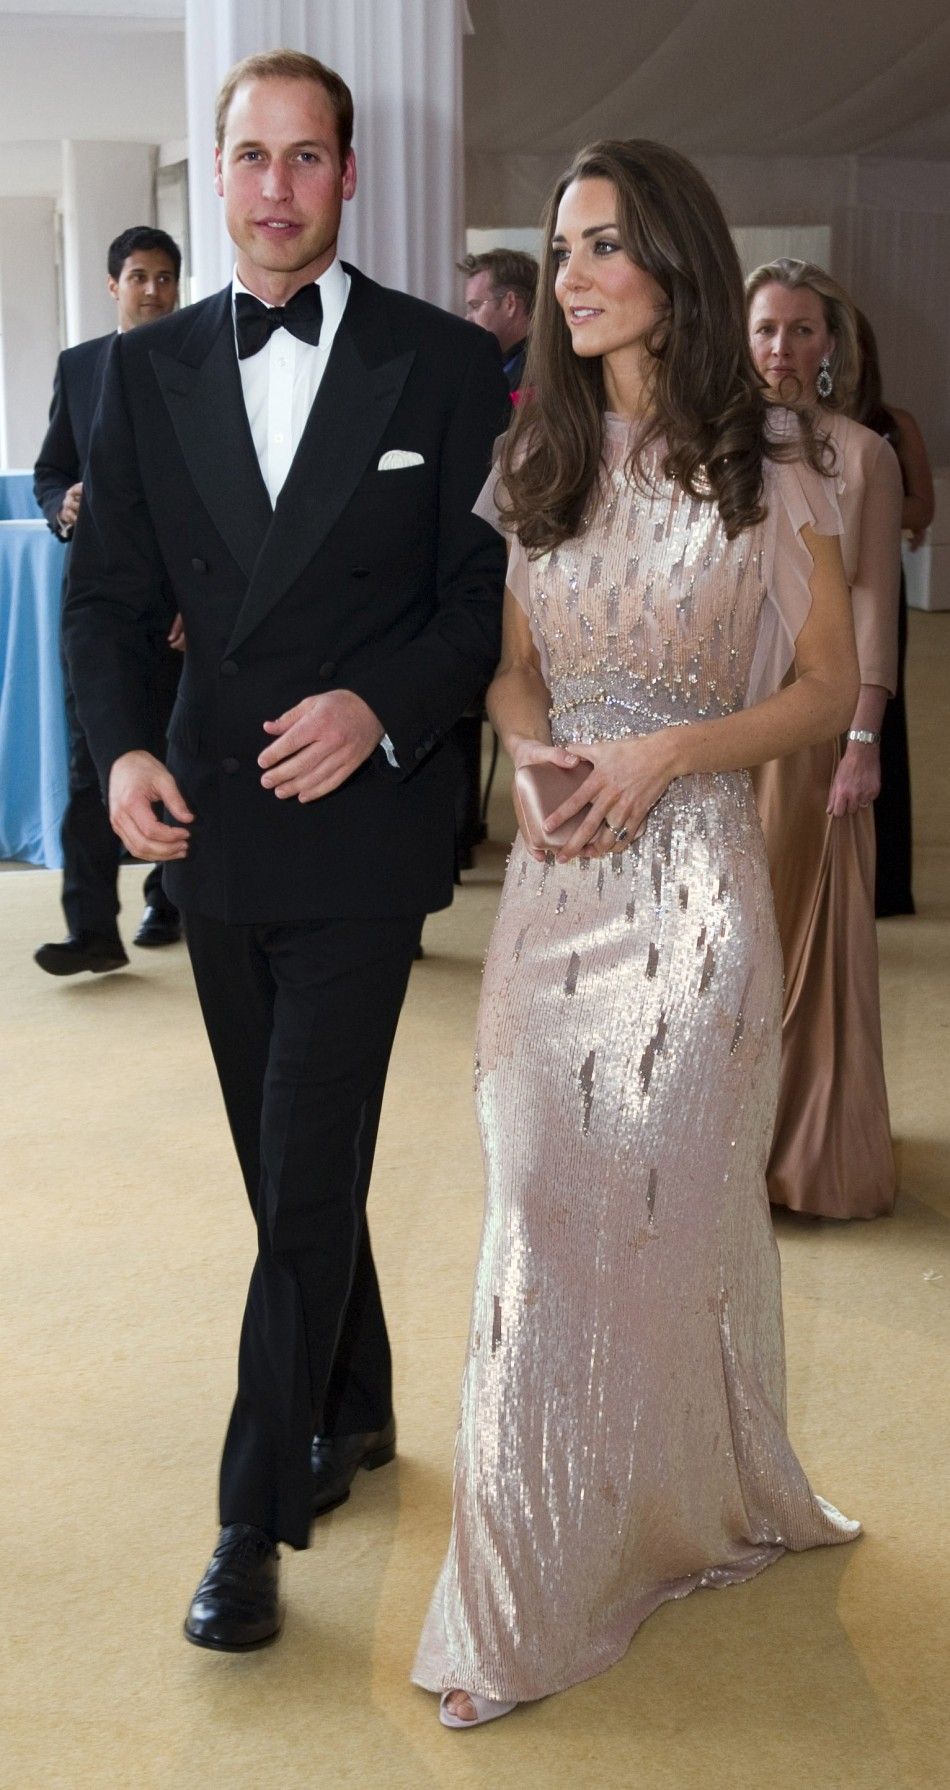 Britain039s Prince William and his wife Catherine, Duchess of Cambridge arrive at ARK gala dinner at Kensington Palace in London